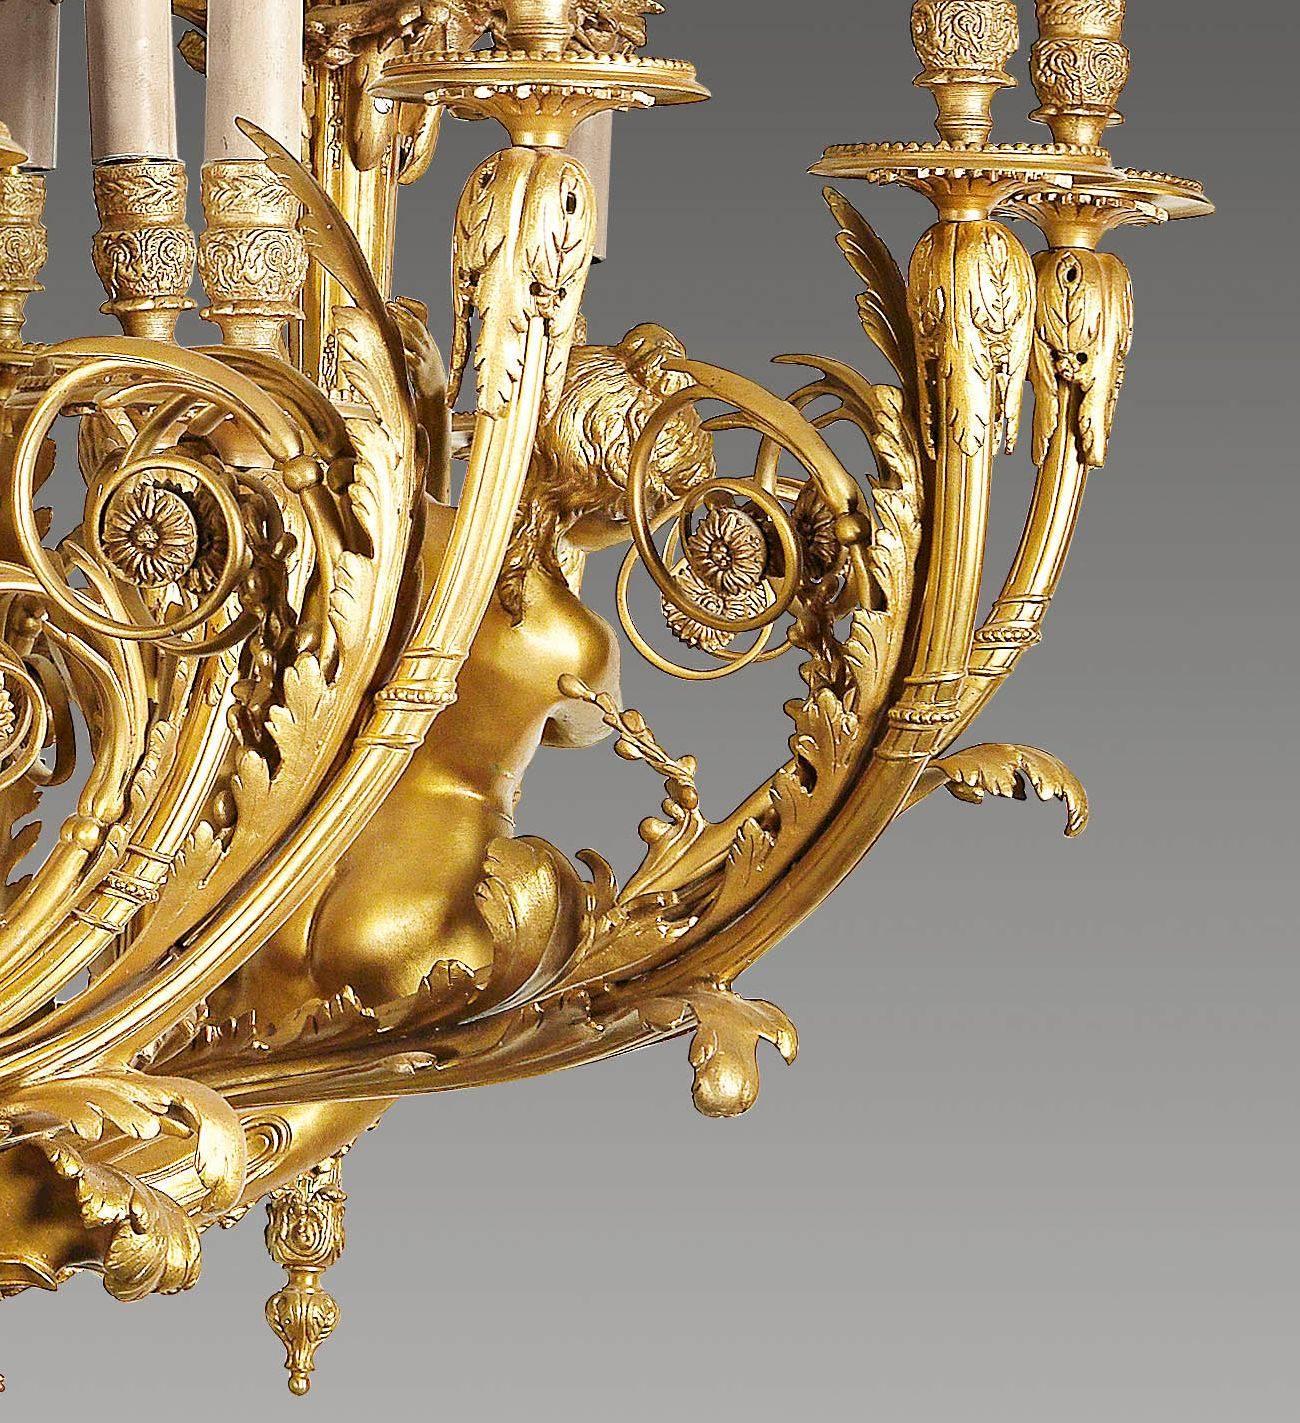 Hand-Crafted Monumental Chandelier in Louis XVI Style, According to J.-B. Klagmann